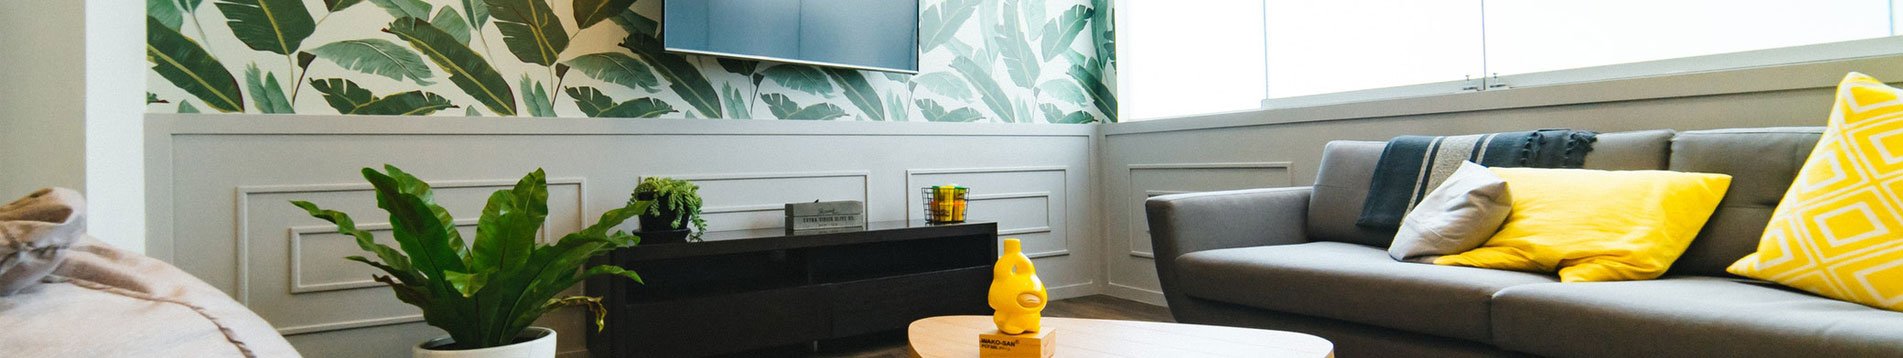 Top Home Interior Design Trends for 2019: Does Your Home Feature Any of Them?